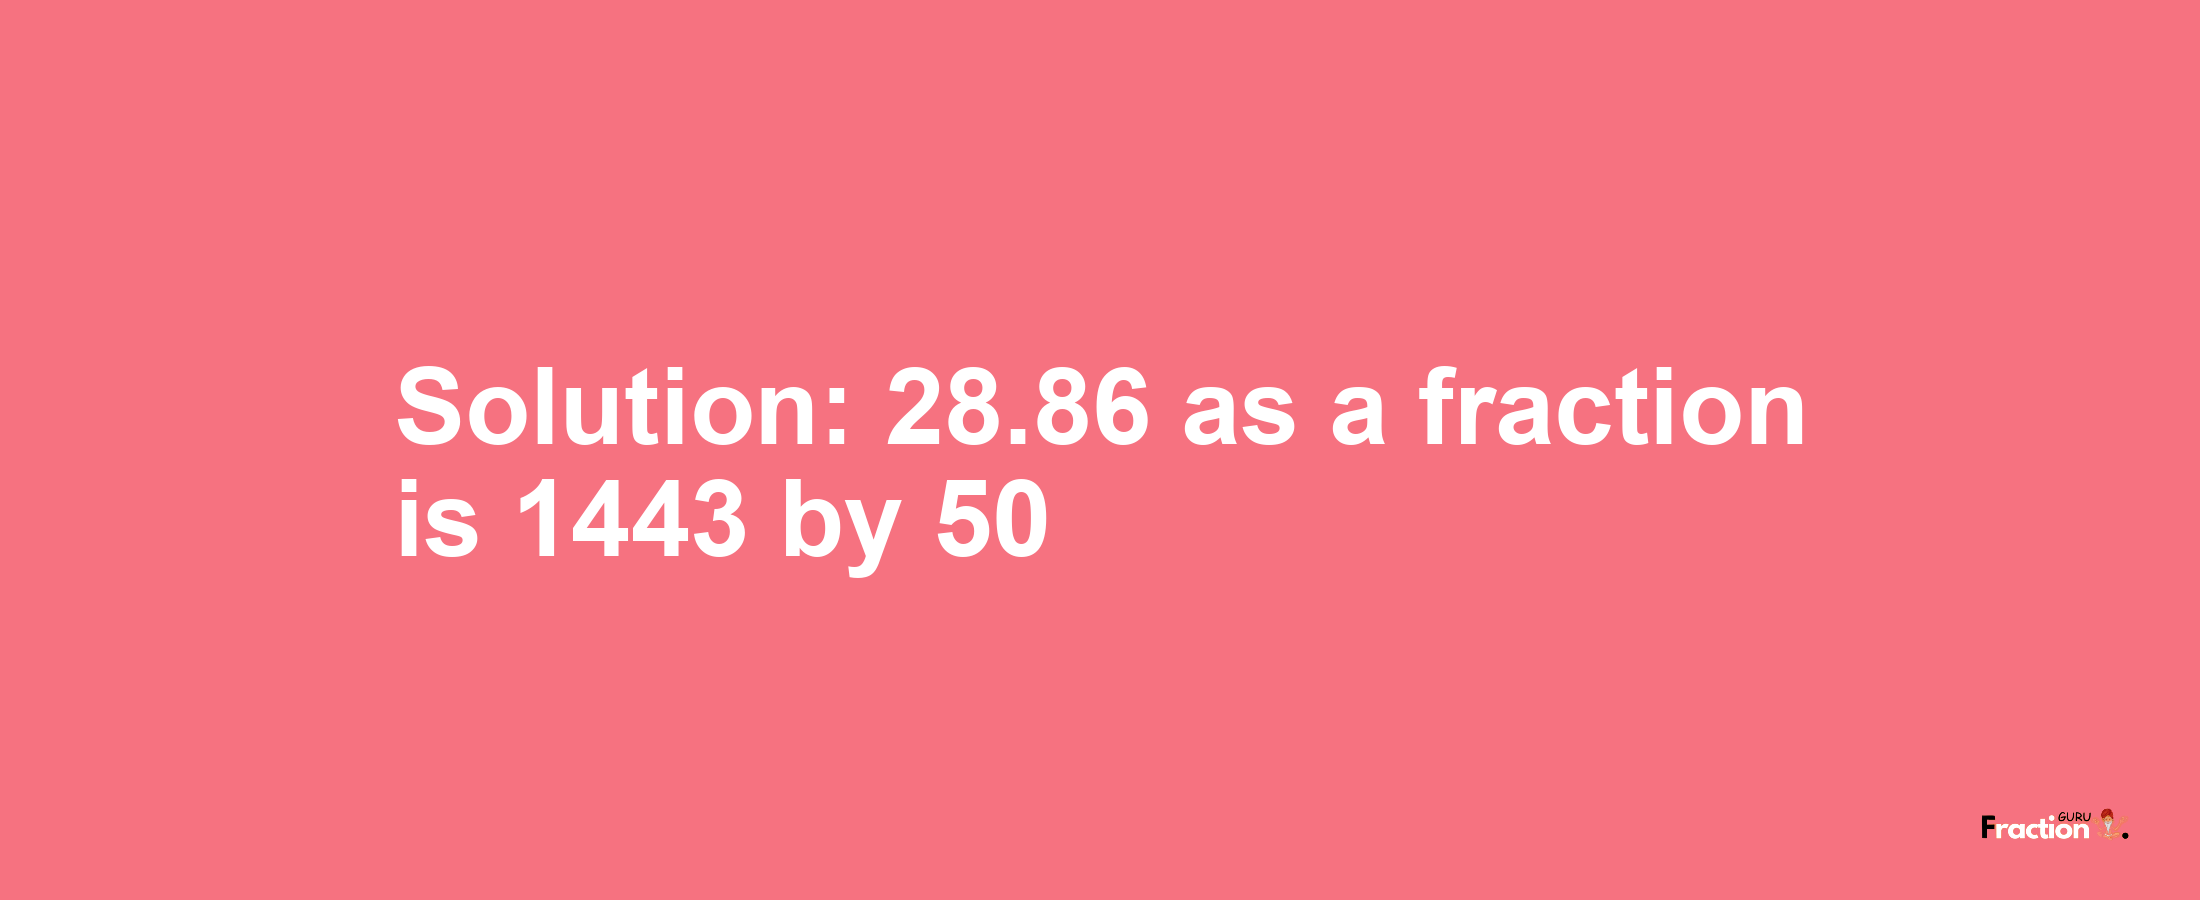 Solution:28.86 as a fraction is 1443/50